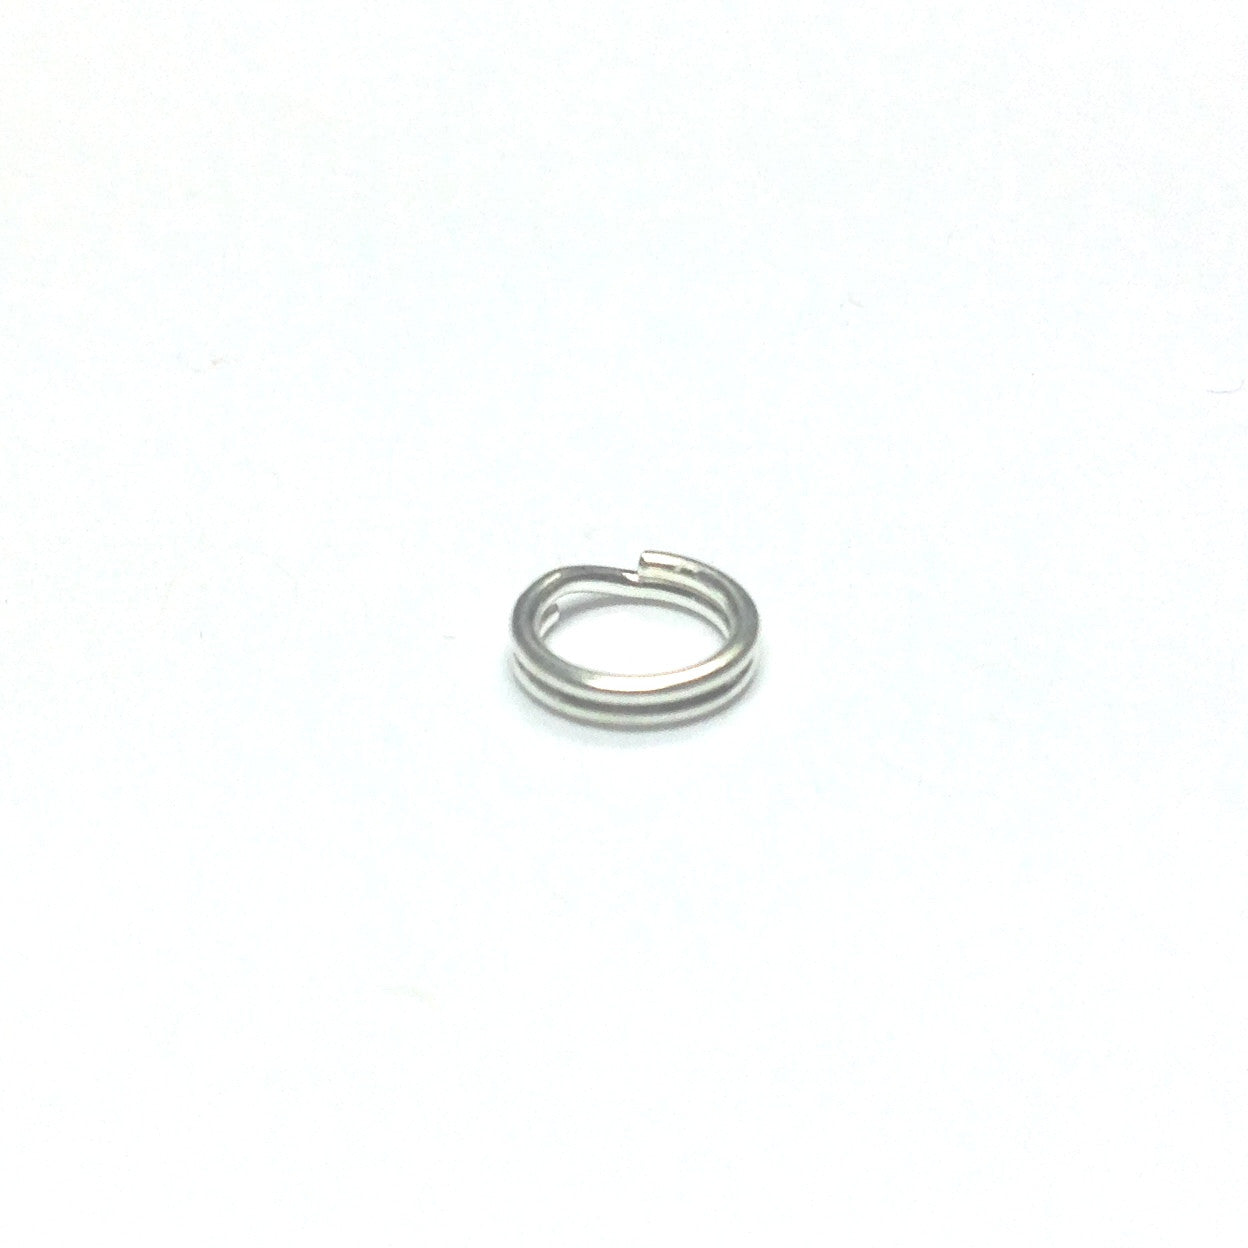 6MM Split Ring Silver Plate (144 pieces)